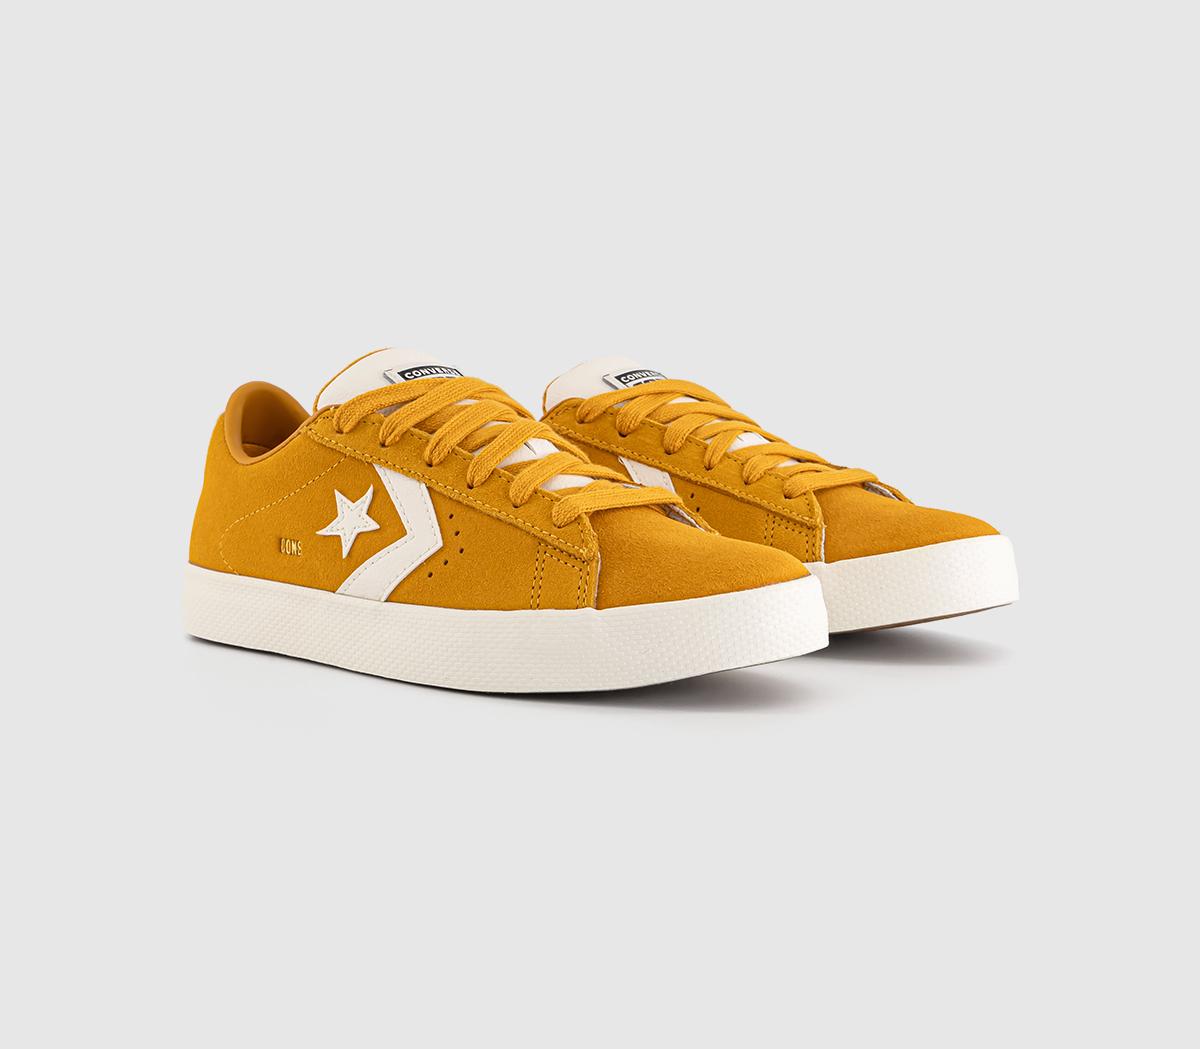 Converse Womens Pl Vulc Pro Ox Trainers Sunflower Gold Egret Yellow, 6.5